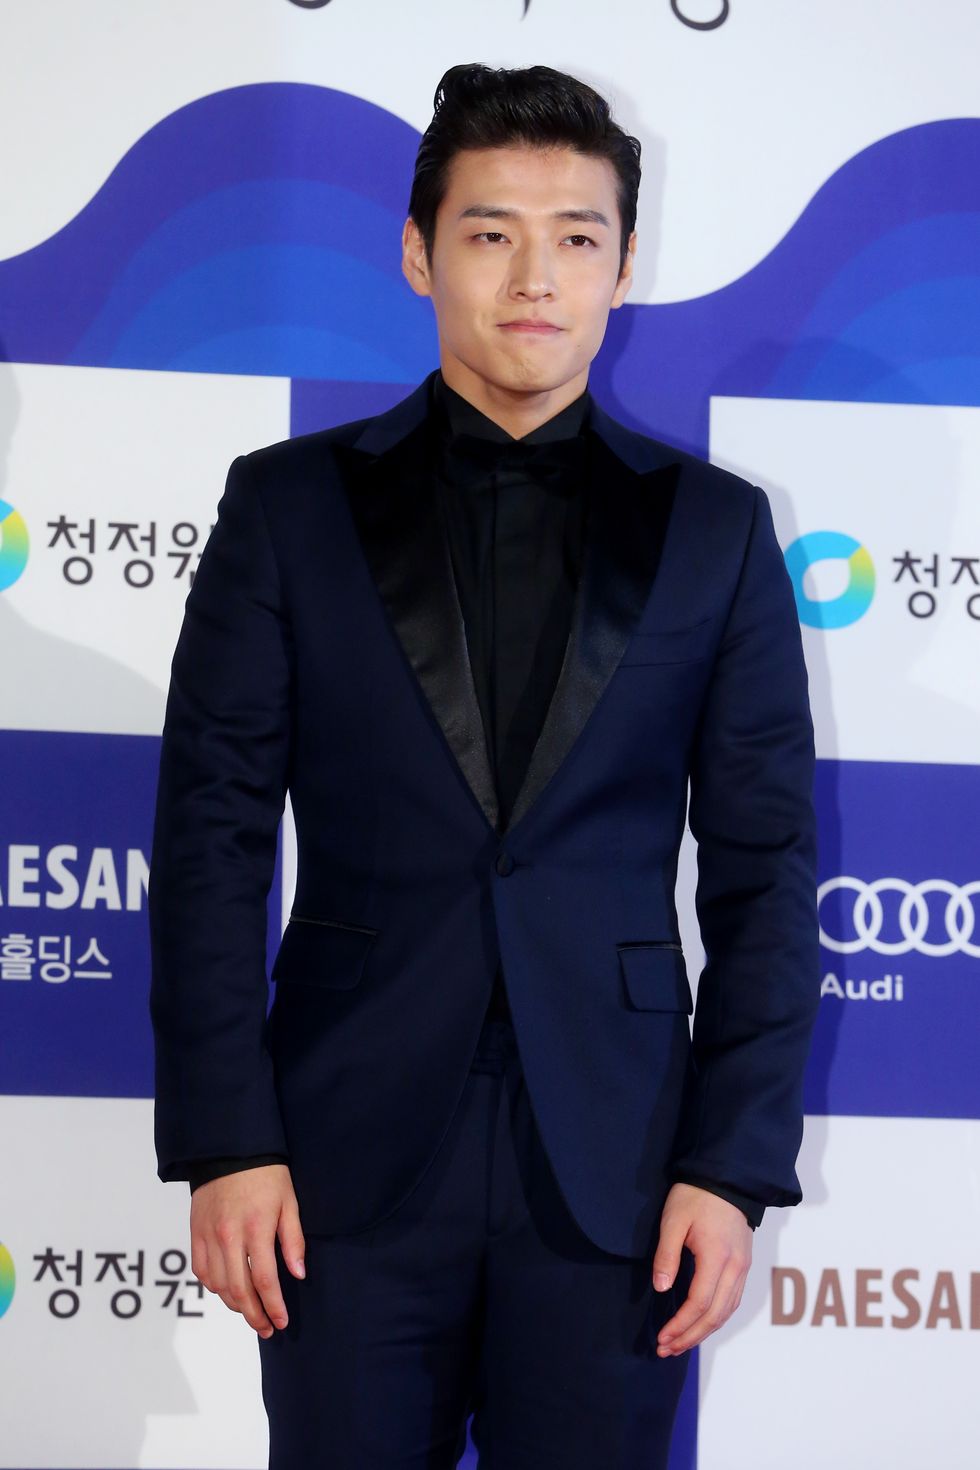 s korean actor kang ha neul
south korean actor kang ha neul poses for a photo during an awarding ceremony for the 36th blue dragon film awards in seoul on nov 26, 2015 yonhap2015 11 27 090330
copyright ⓒ 1980 2015 yonhapnews agency all rights reserved